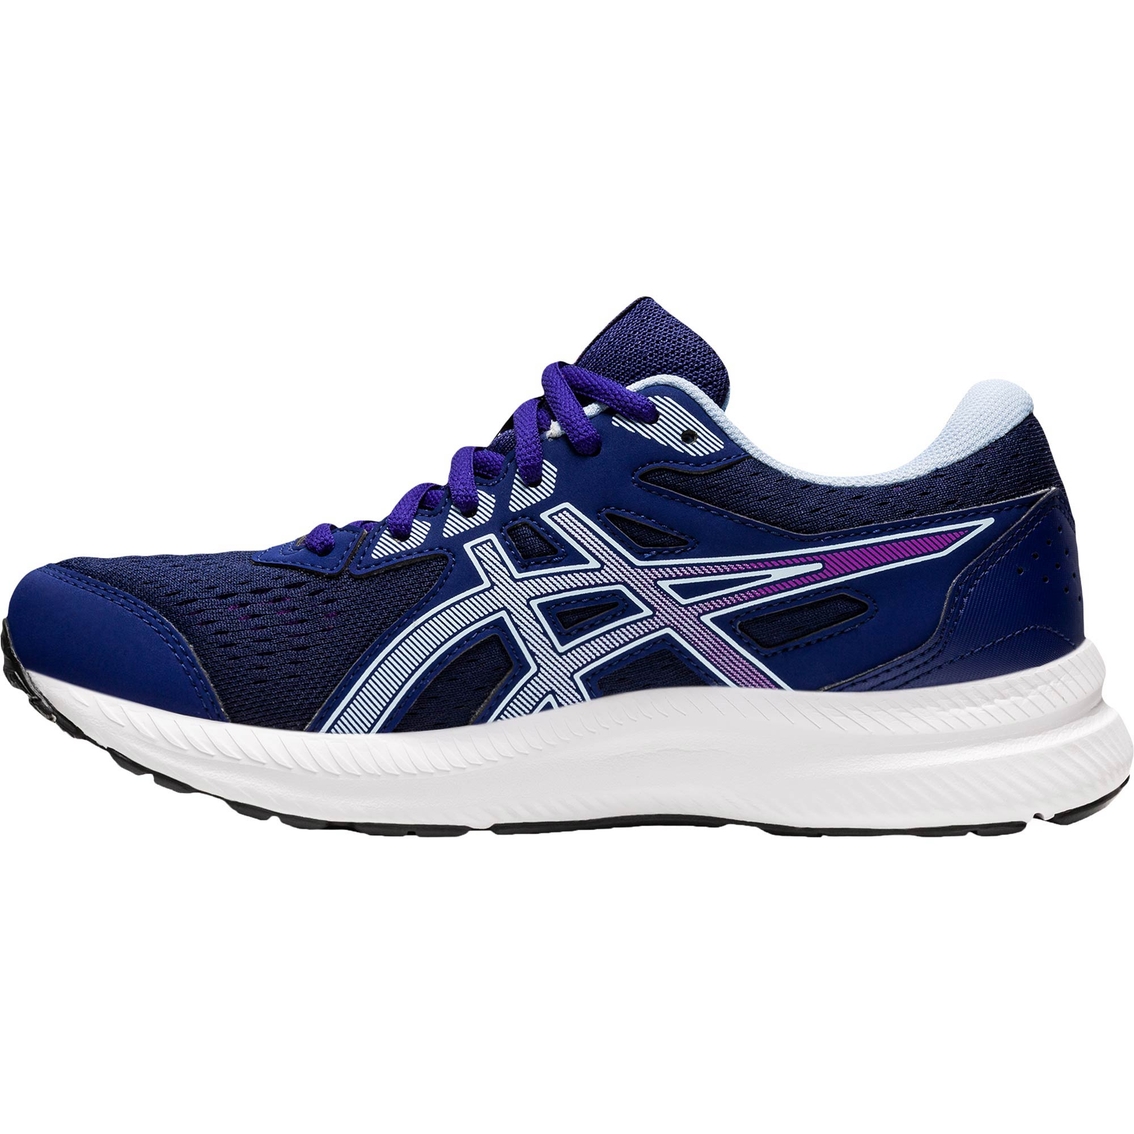 ASICS Women's GEL Contend 8 Running Shoes - Image 3 of 7